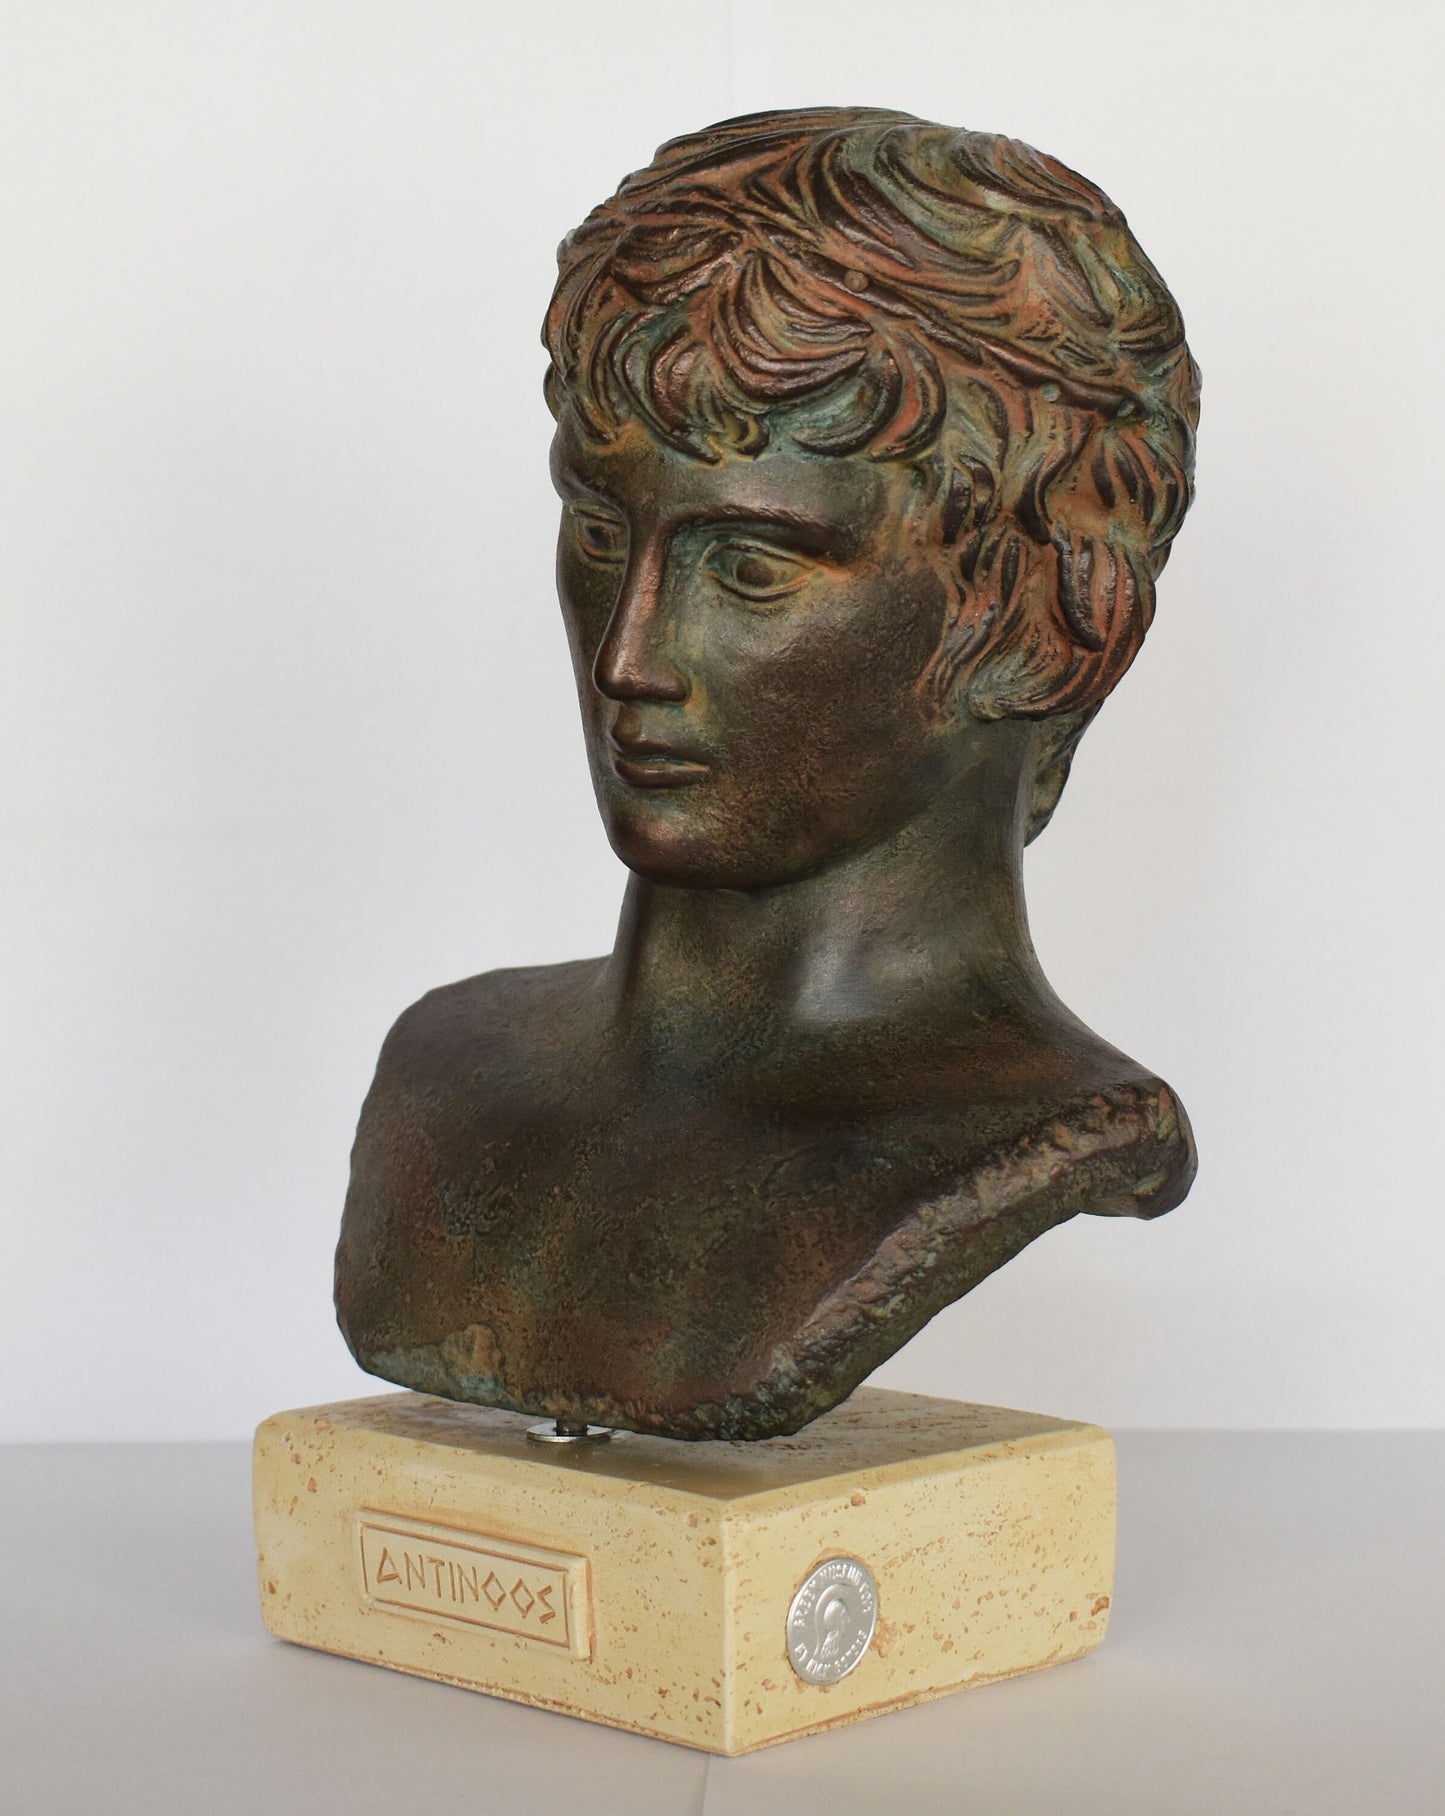 Antinous - Antinoos - An Ancient Love Story with Roman Emperor Hadrian over the Centuries - Reproduction - Head Bust - Bronze Colour Effect